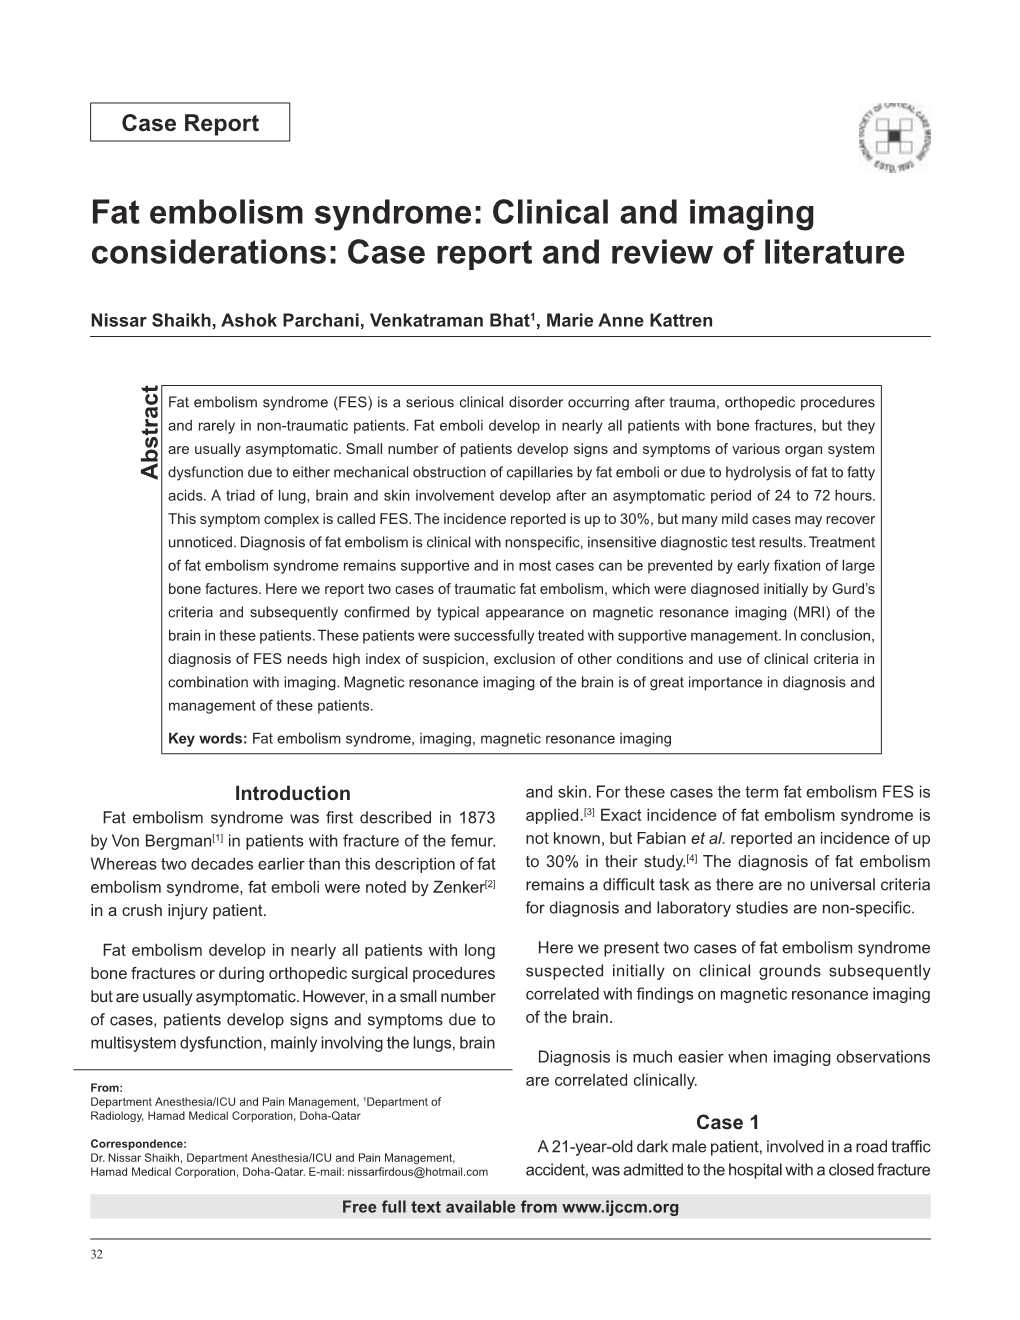 Fat Embolism Syndrome: Clinical and Imaging Considerations: Case Report and Review of Literature